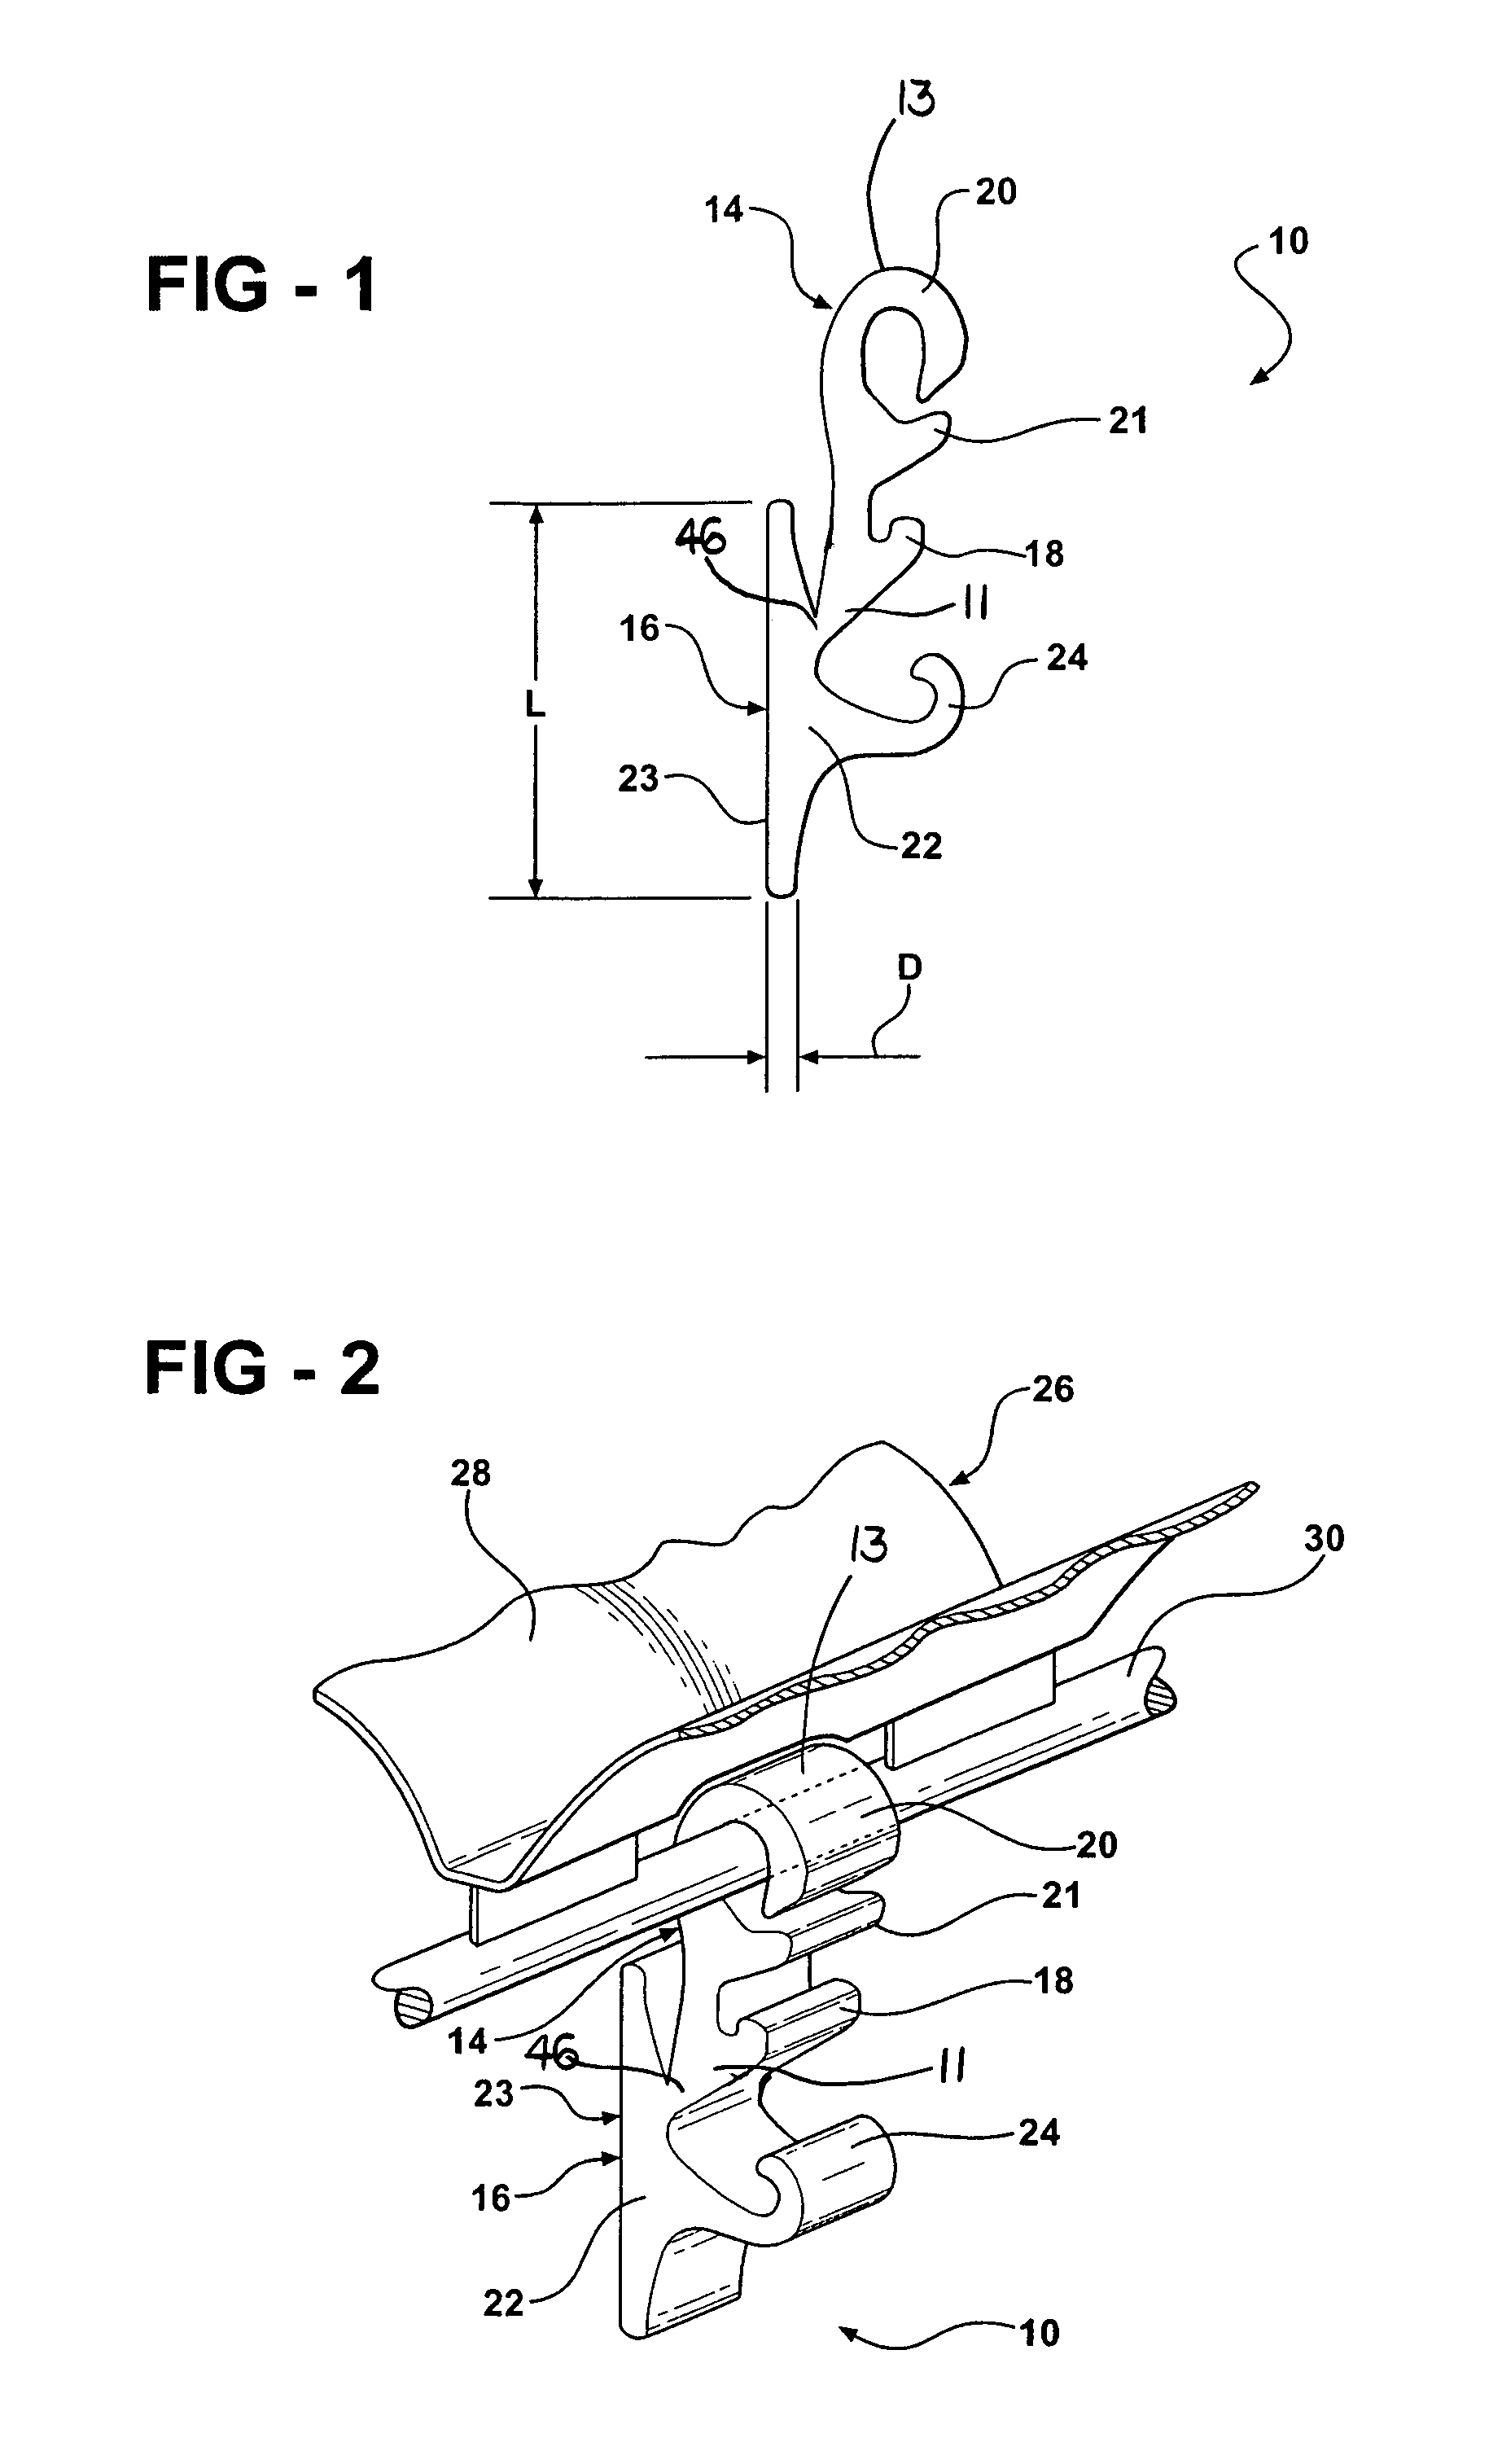 Extruded flexible self-locking trim cover assembly retention clip and method for using same